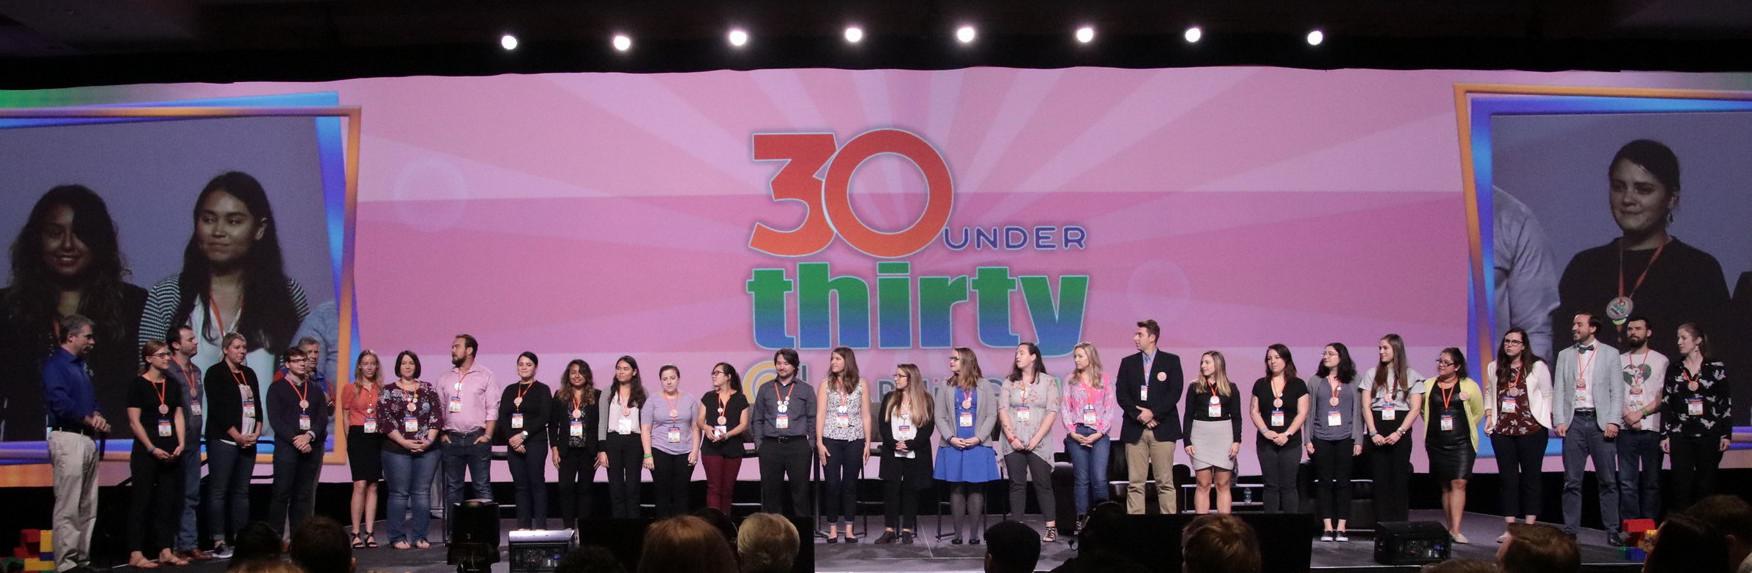 Thirty under 30 applications now open